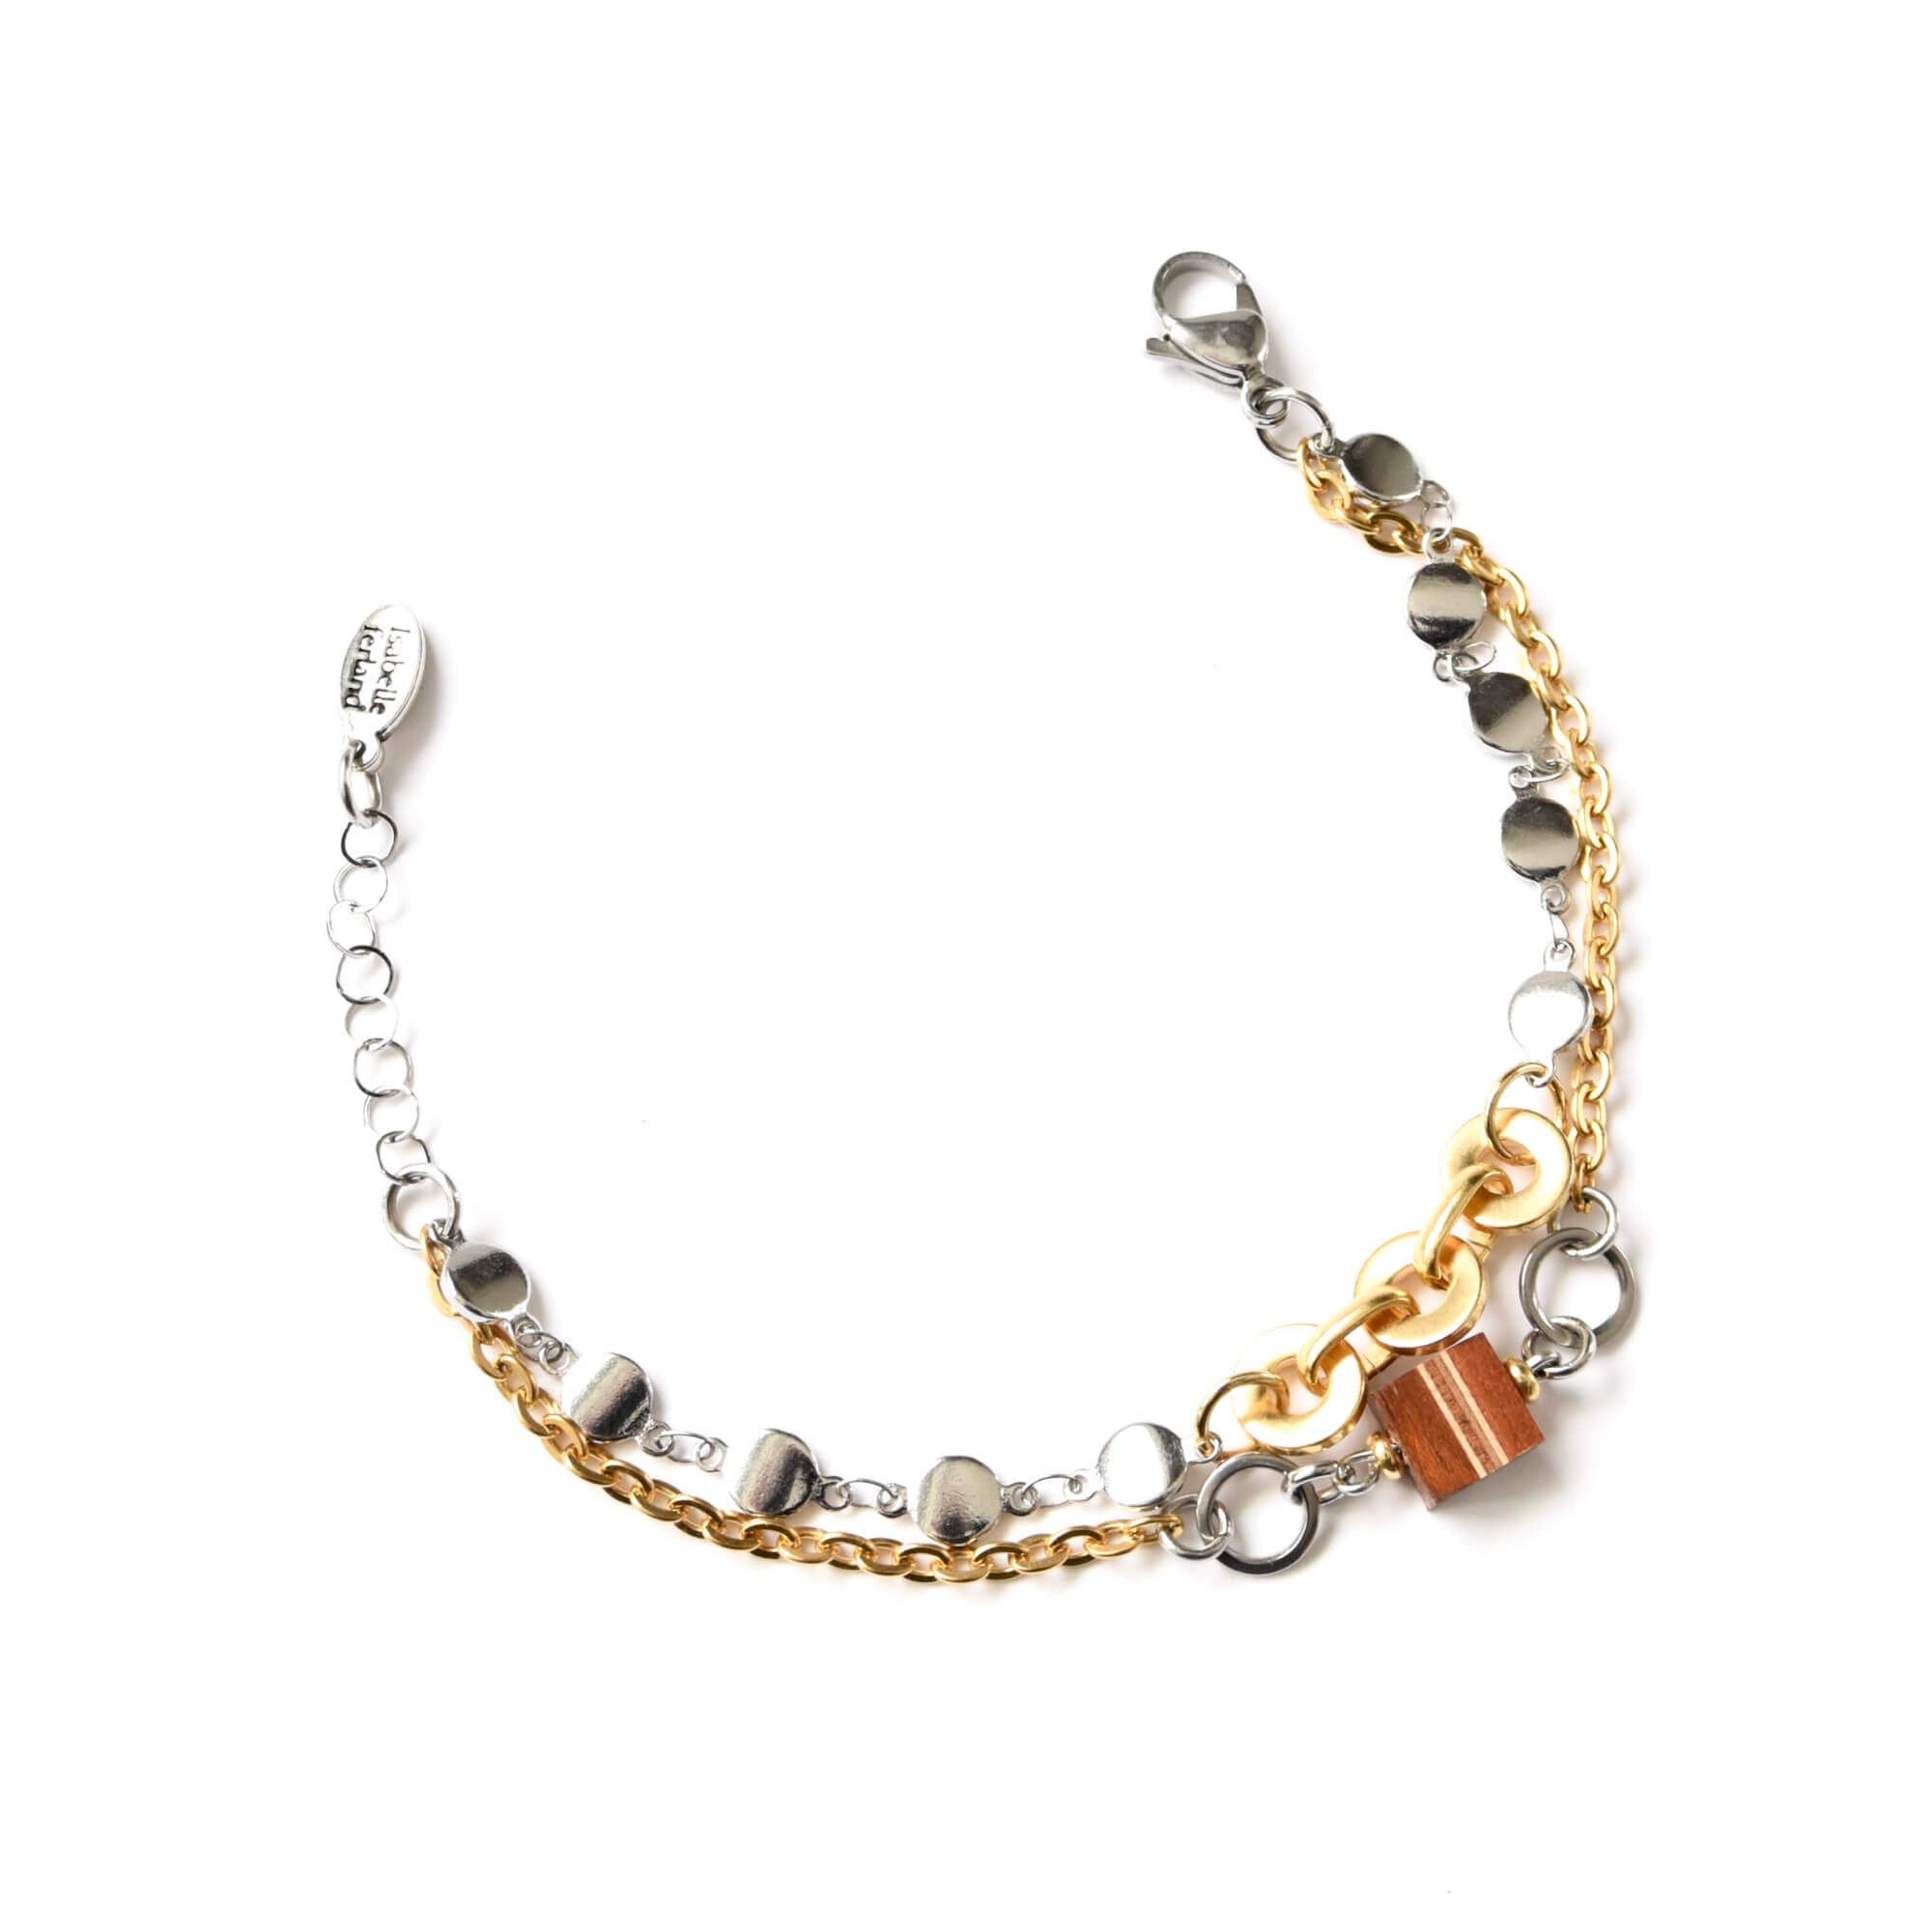 Bracelet from the Hora Dorada collection